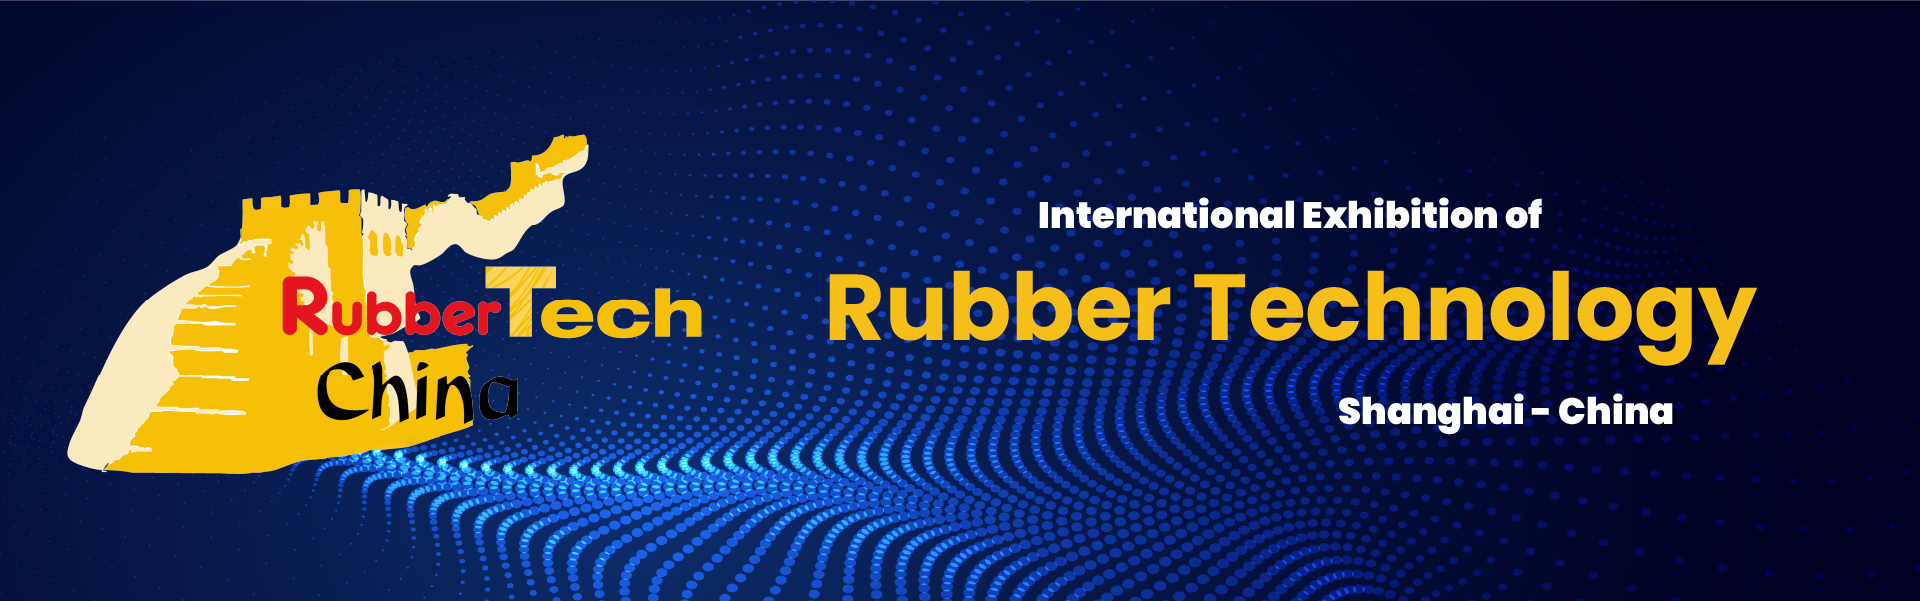 Rubber Technology Exhibition Shanghai China